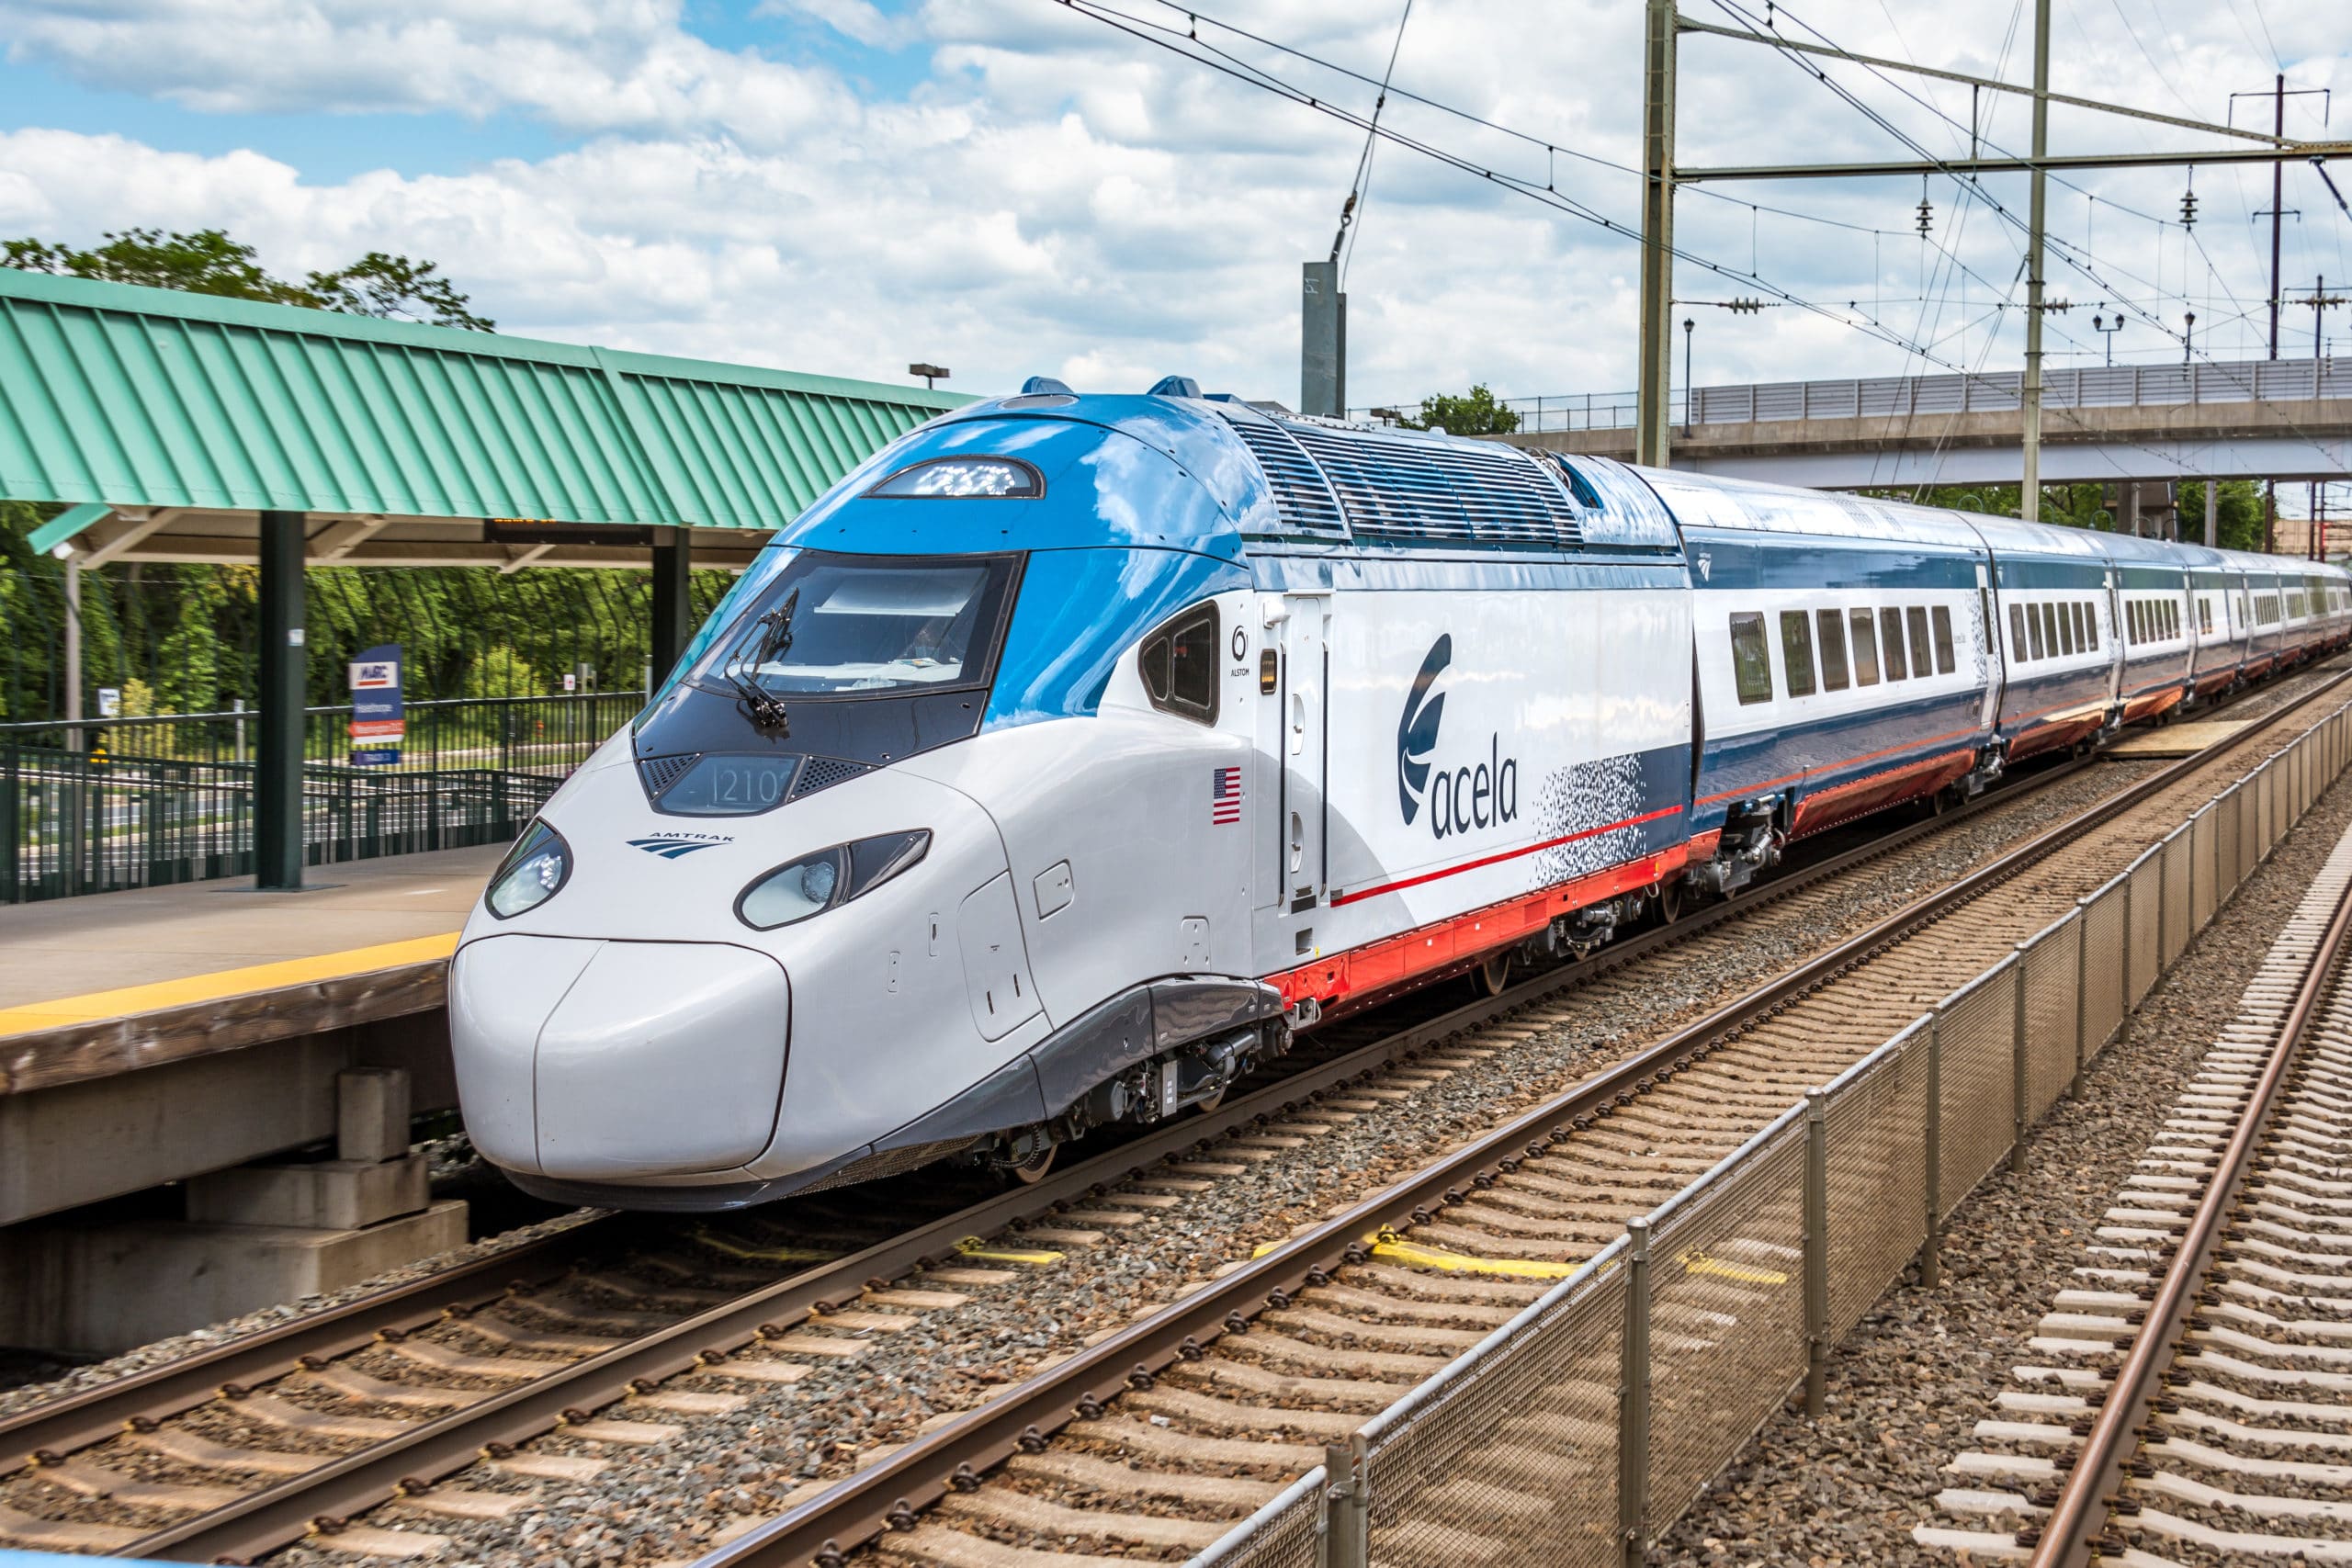 amtrak-s-acela-trains-will-speed-up-to-150-mph-in-new-jersey-flipboard